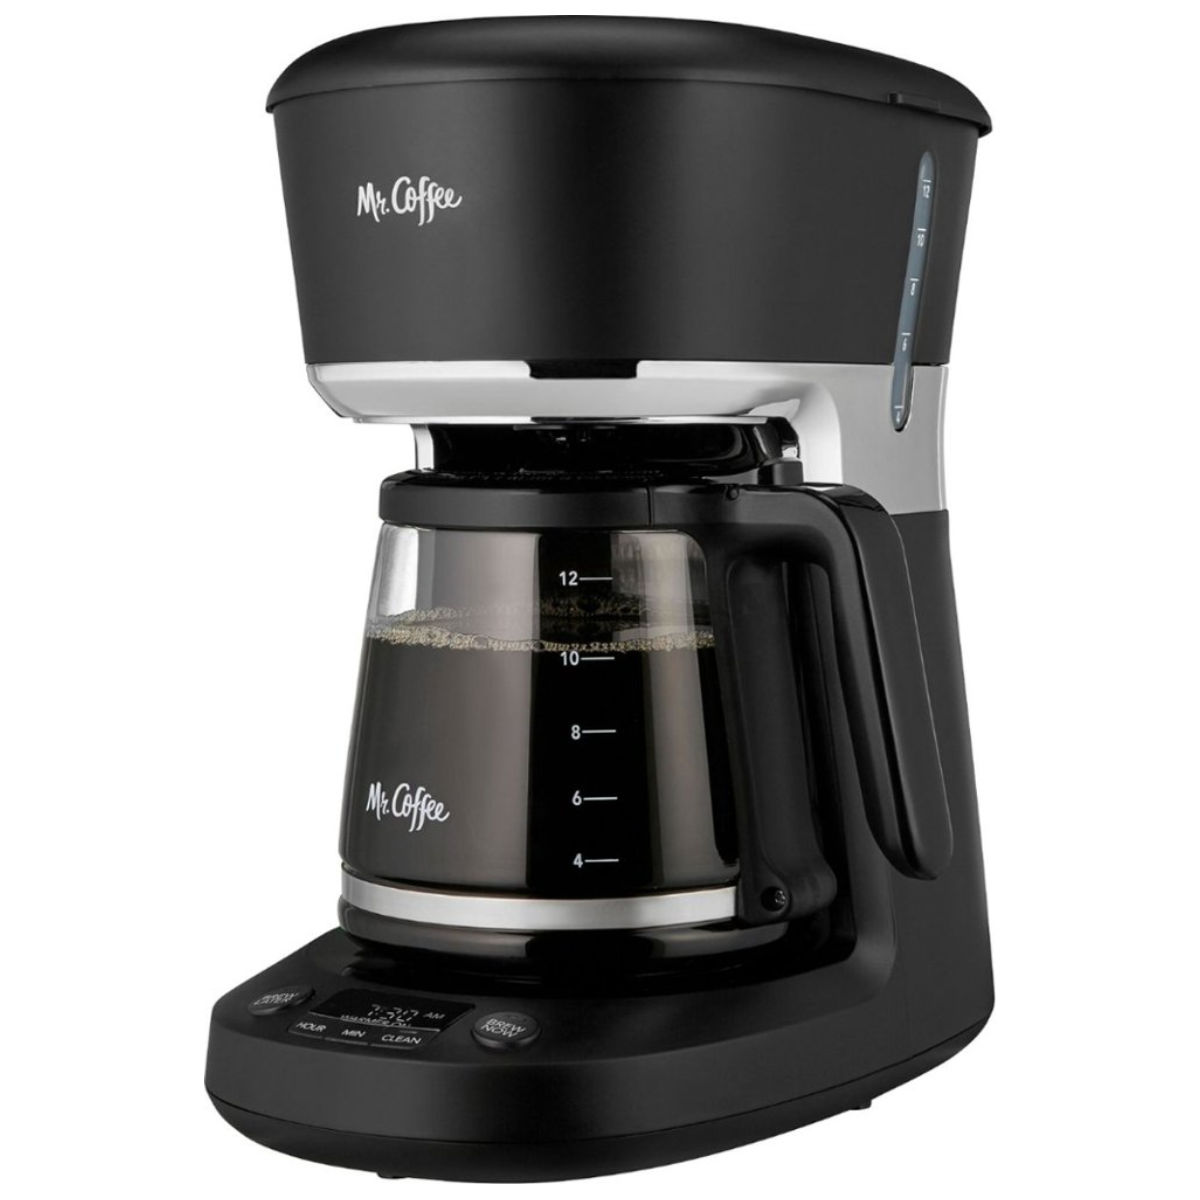 Mr. Coffee 2097746 12-Cup Programmable Coffee Maker